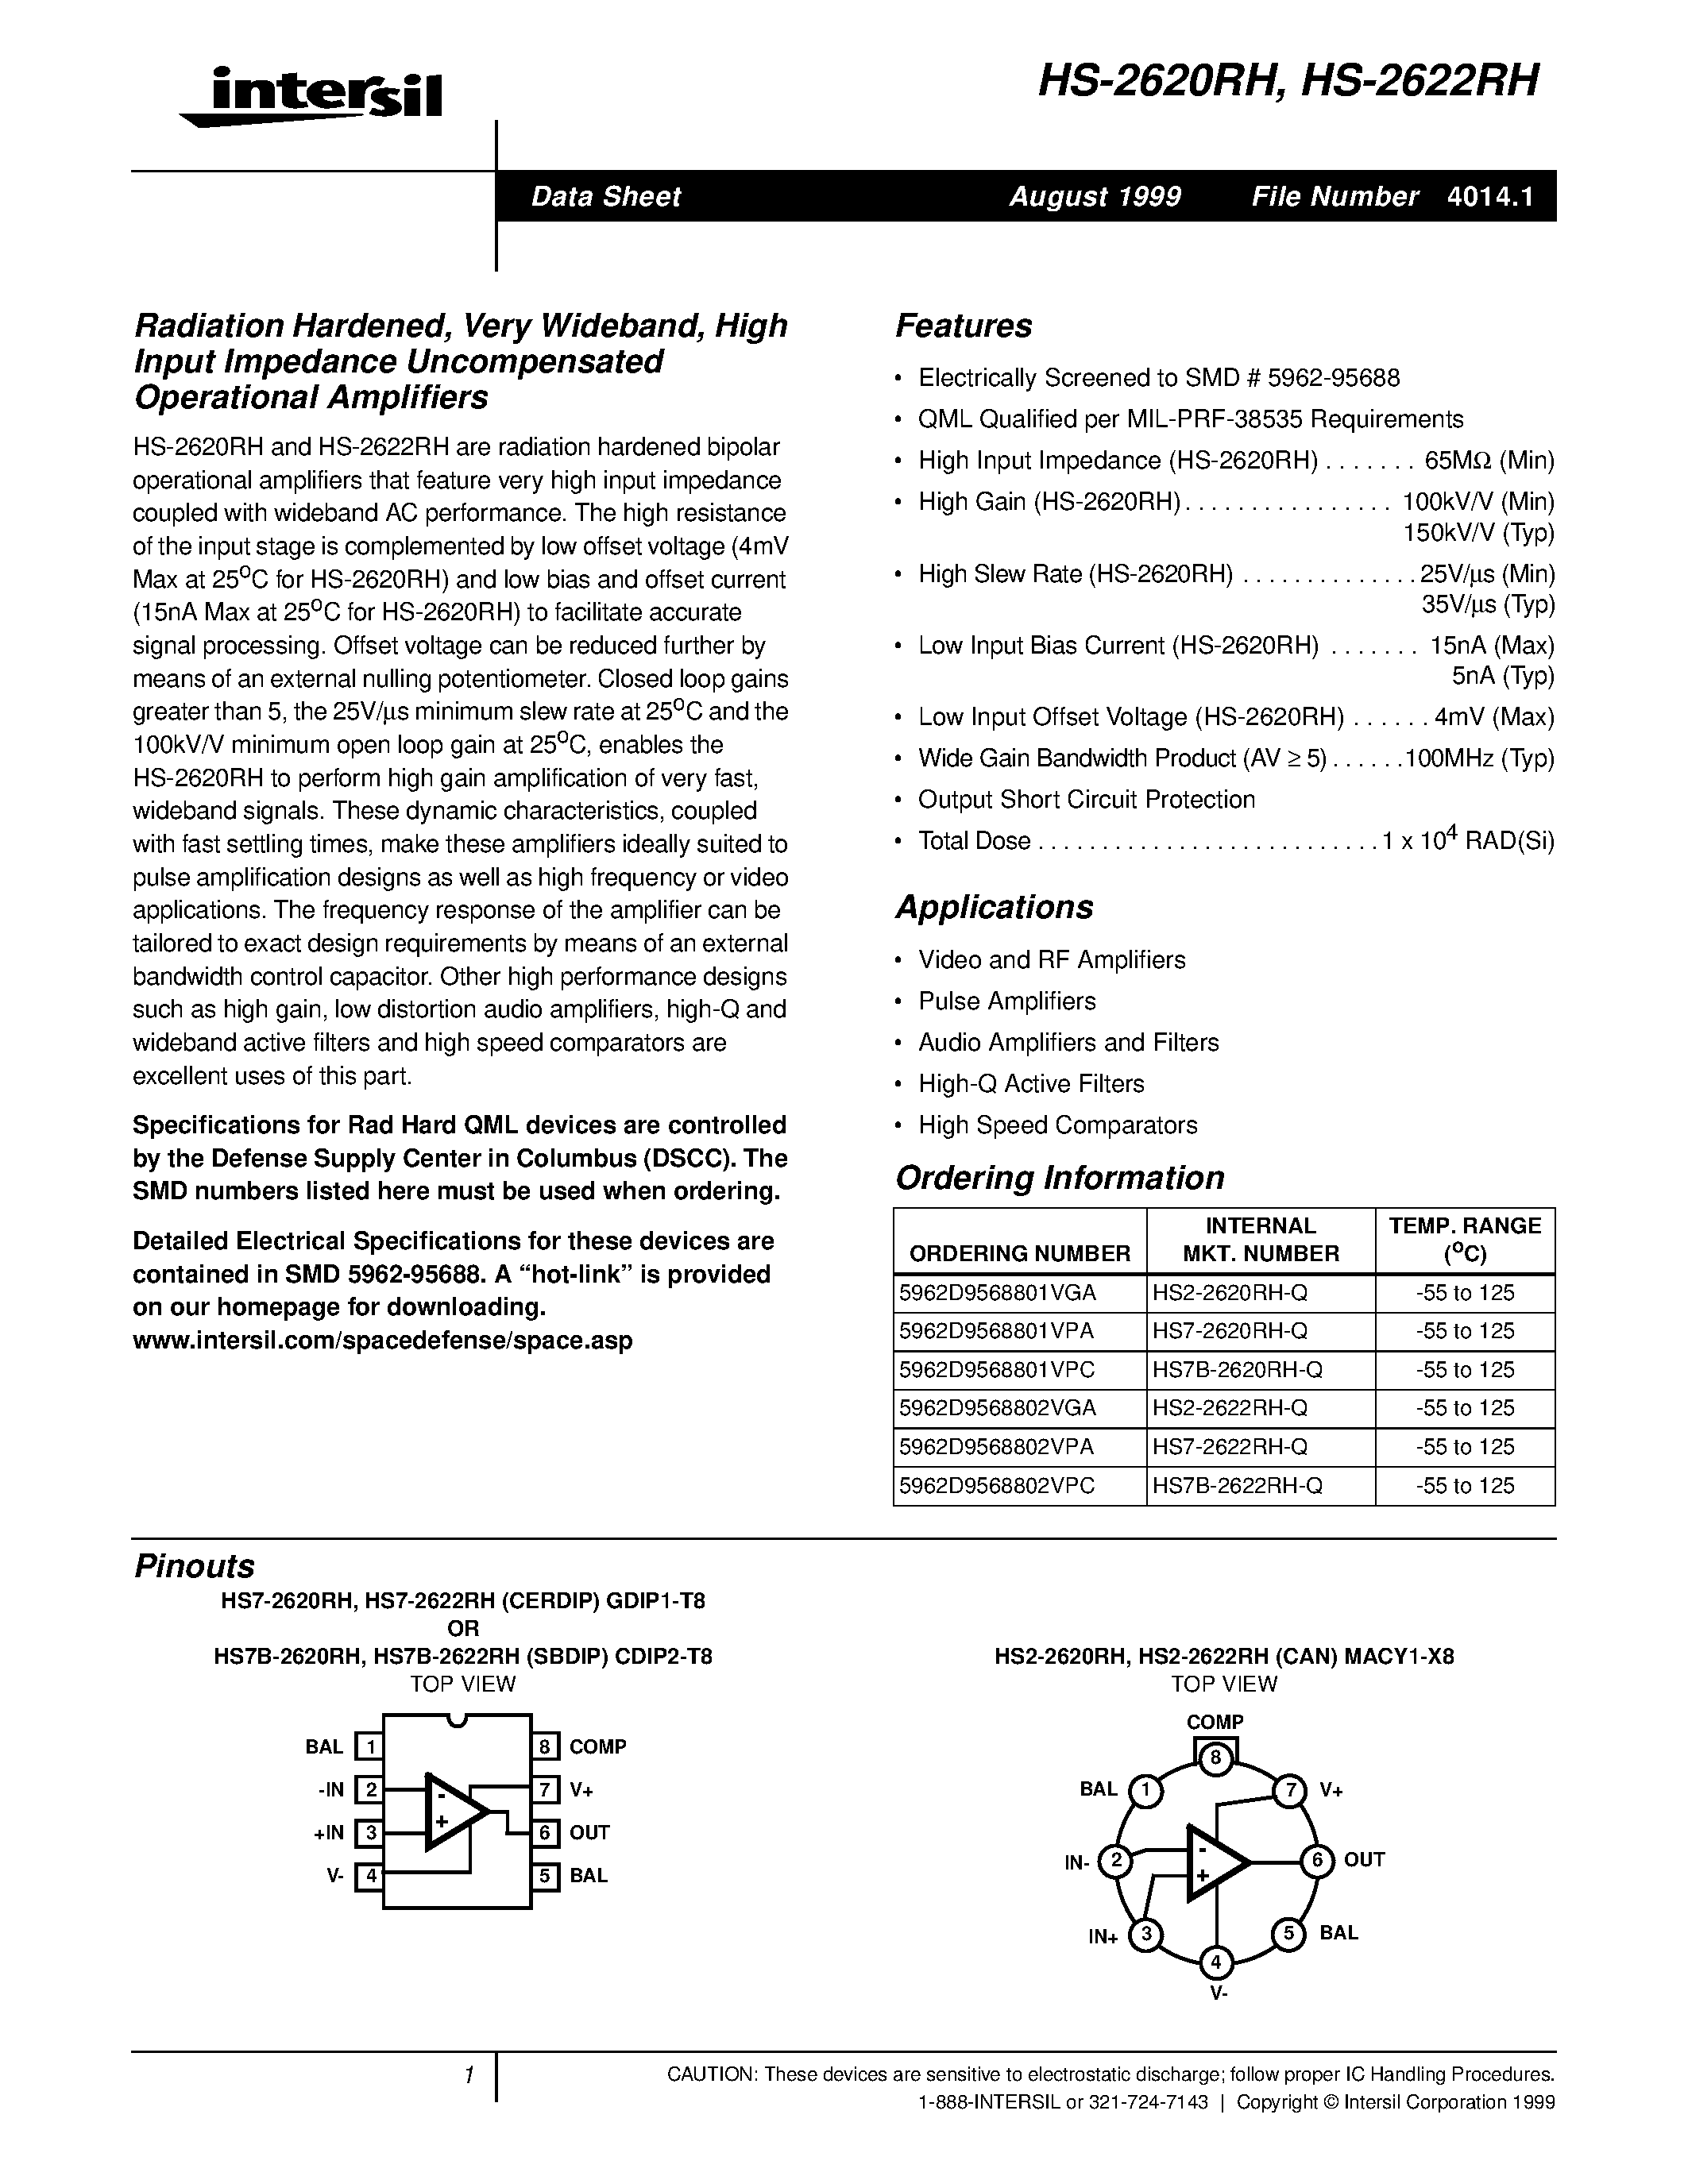 Datasheet HS7-2622RH-Q - Radiation Hardened/ Very Wideband/ High Input Impedance Uncompensated Operational Amplifiers page 1